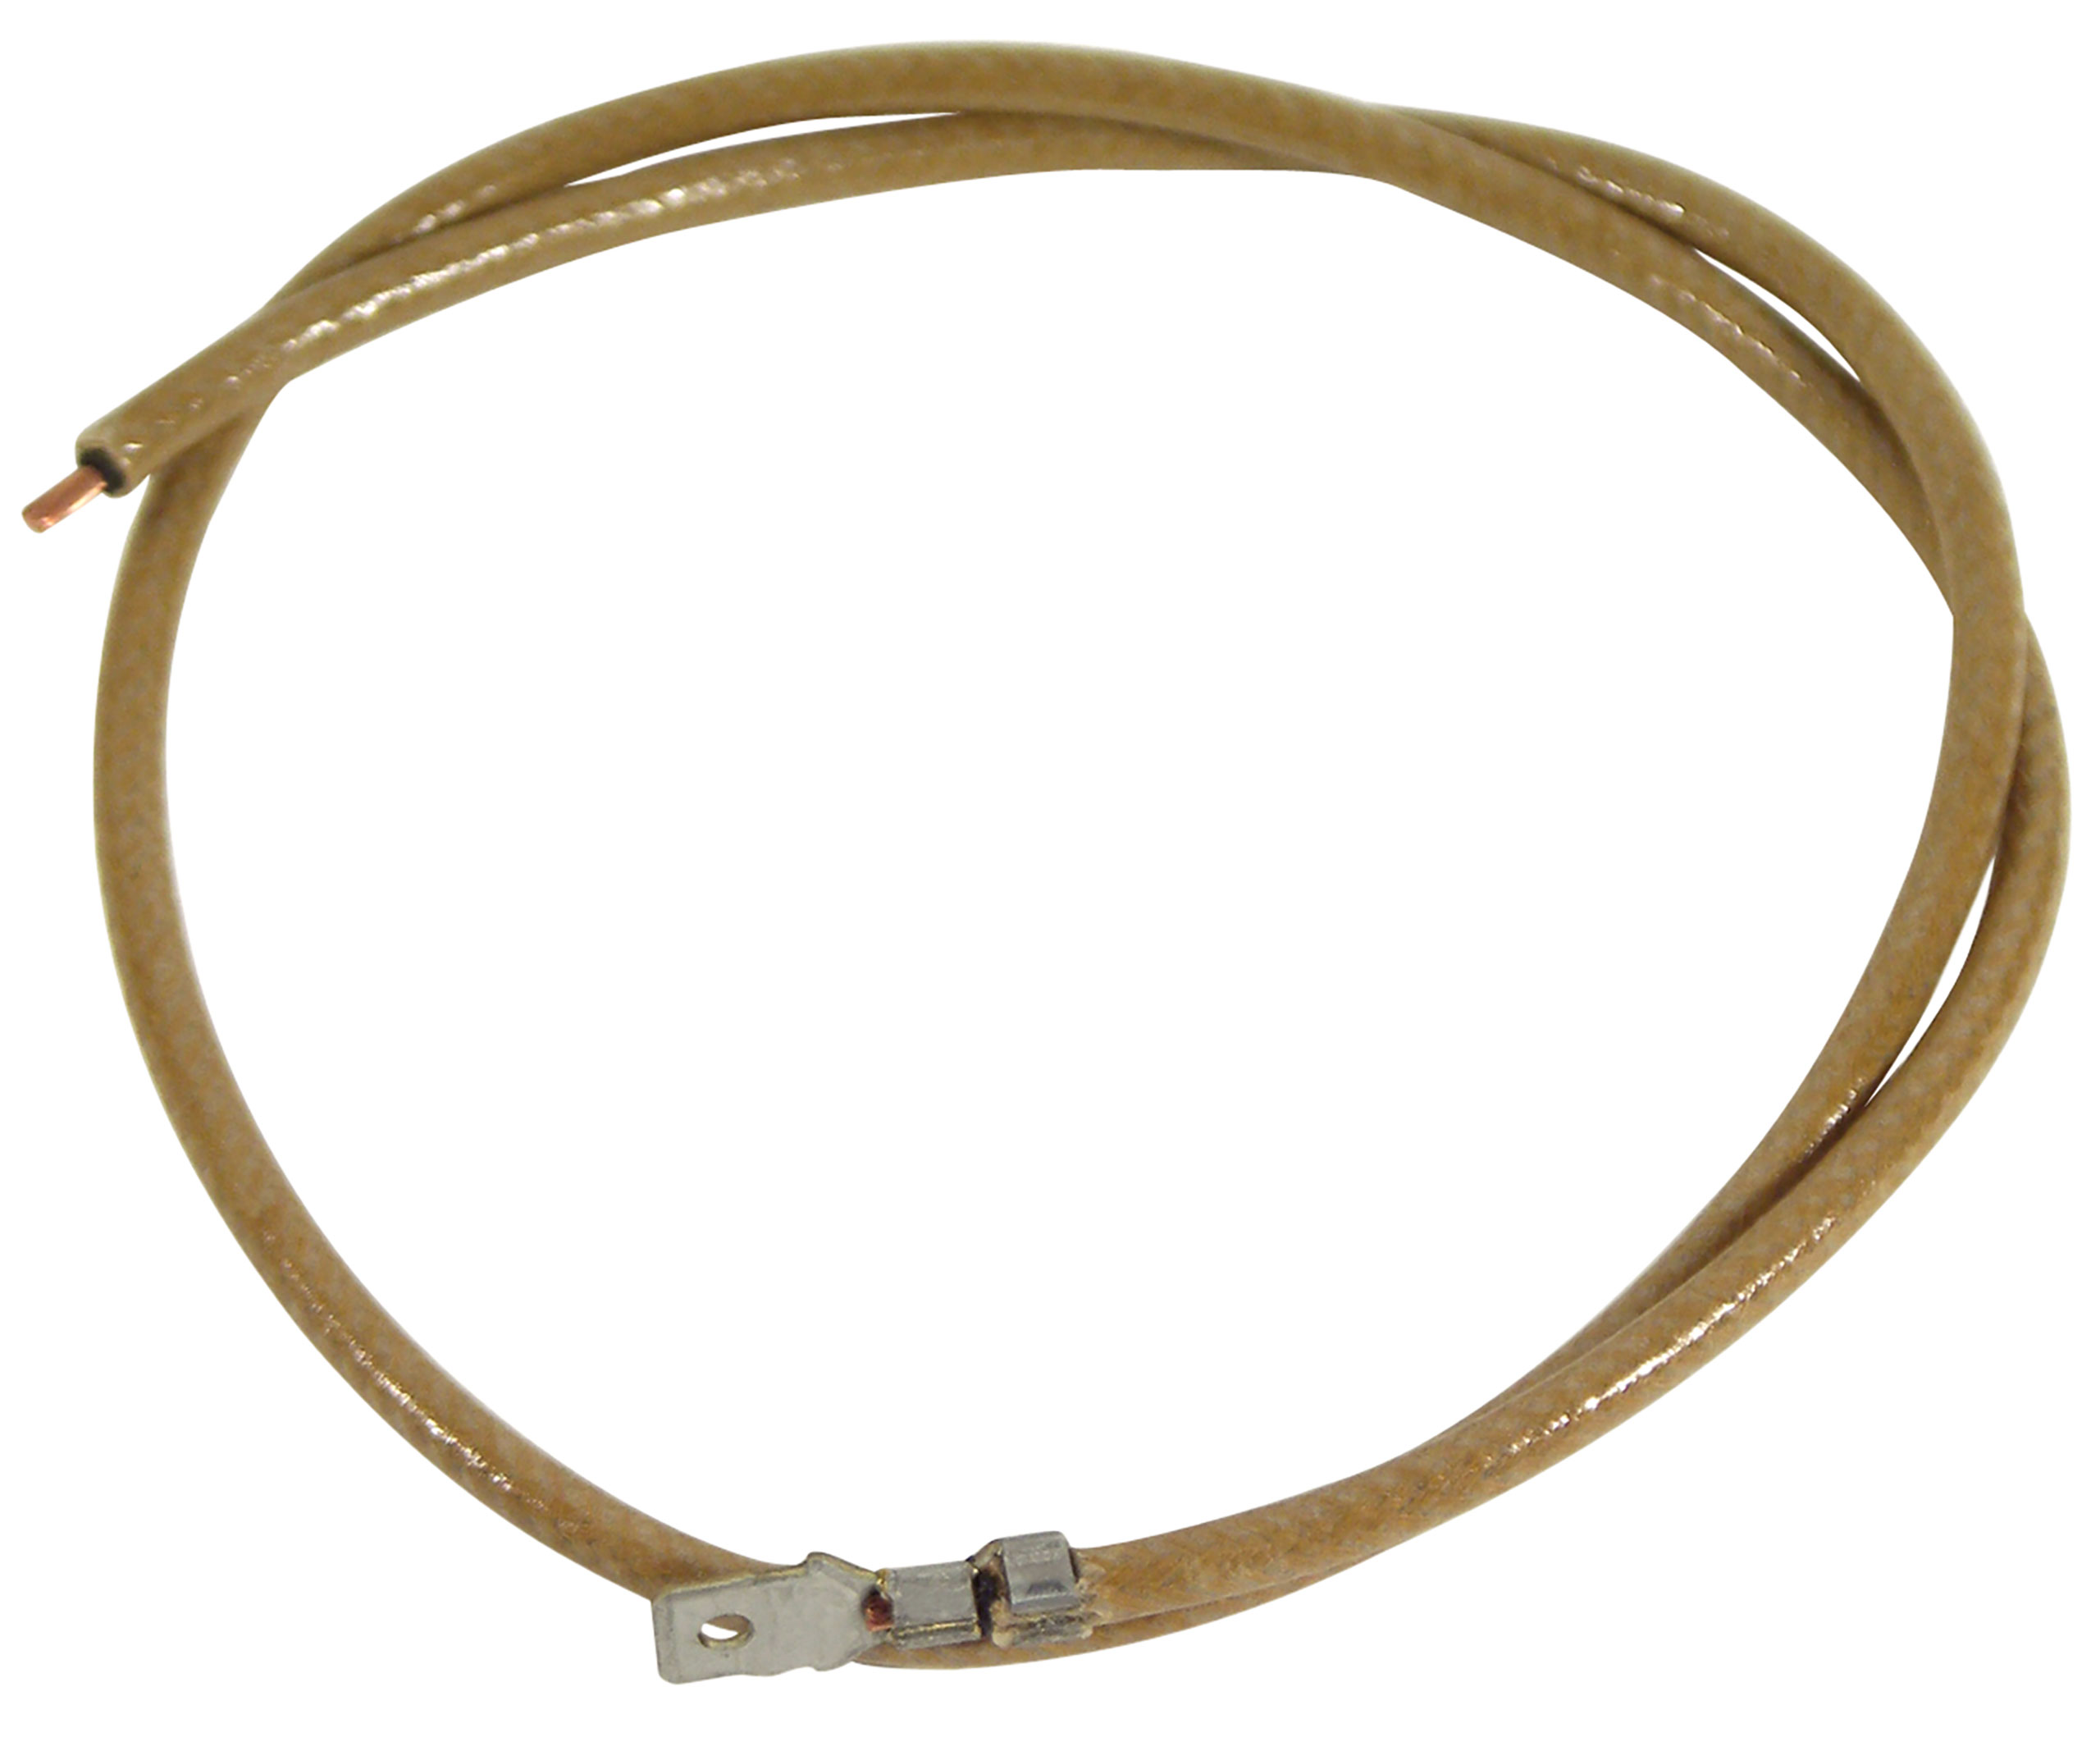 C1 1953-1962 Chevrolet Corvette Horn Wire Lead Harness. - Lectric Limited, Inc.